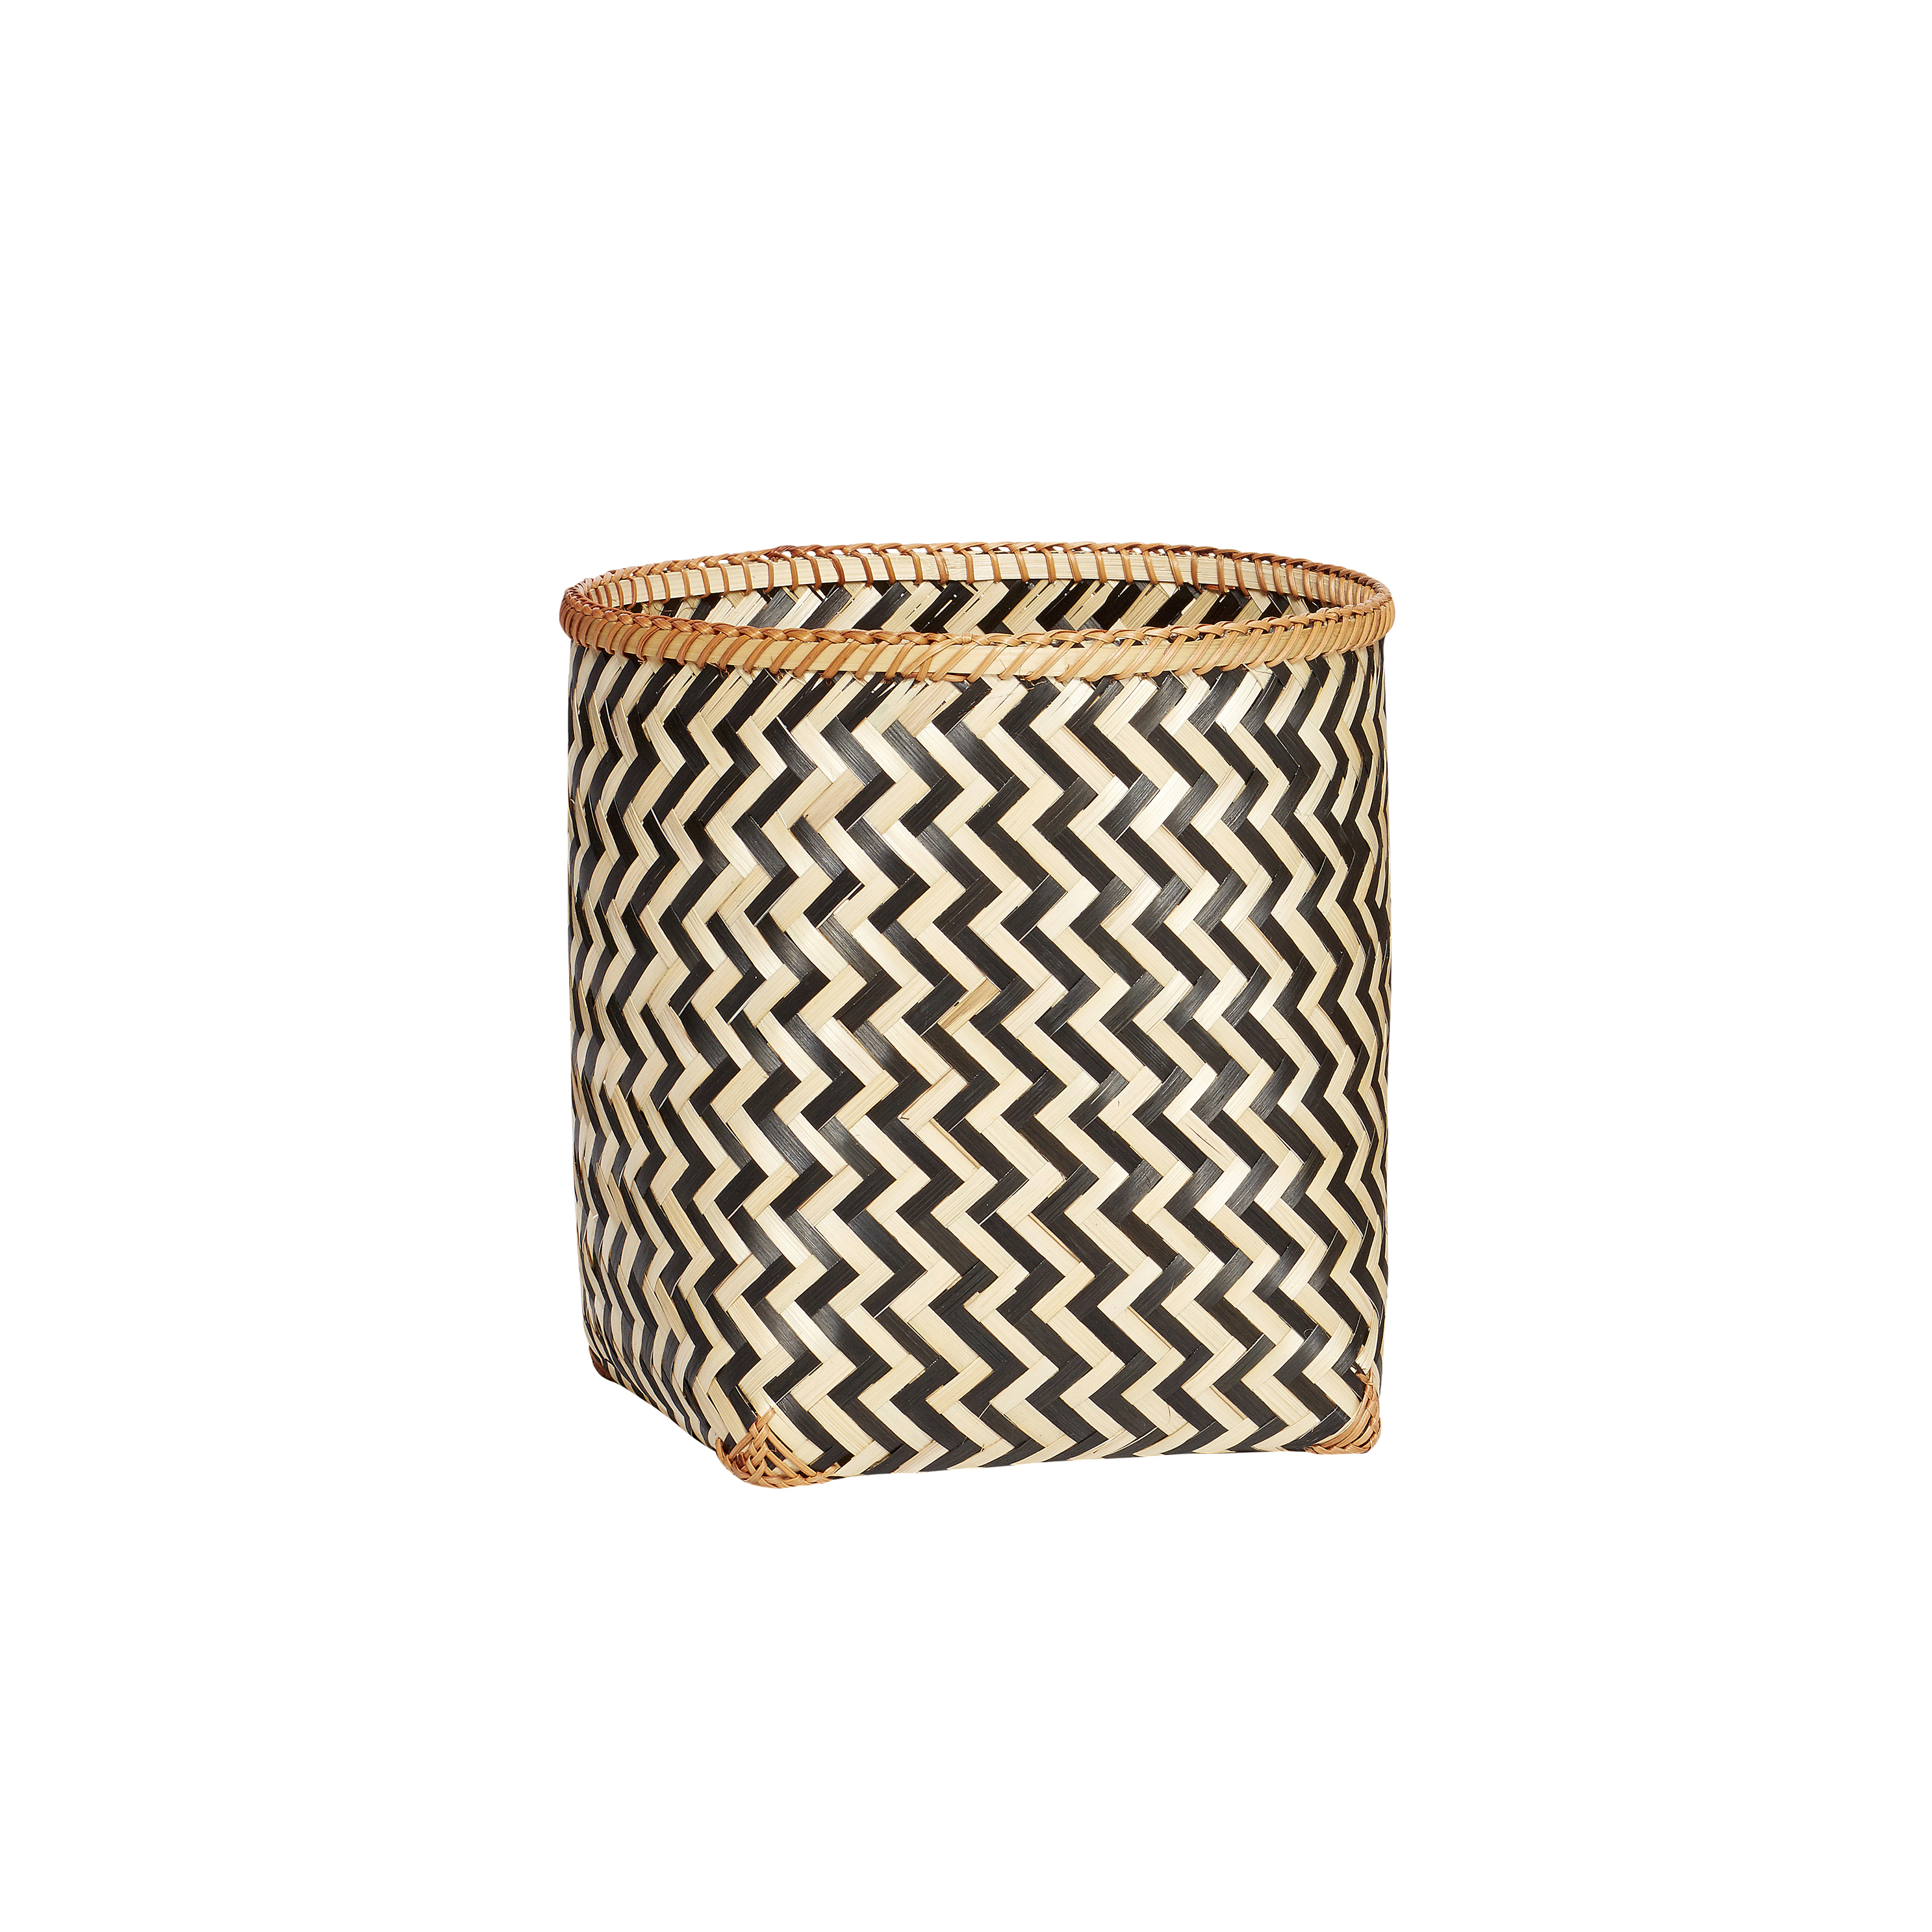 Hubsch Round Bamboo Basket with Black Zig Zag Pattern in Small 